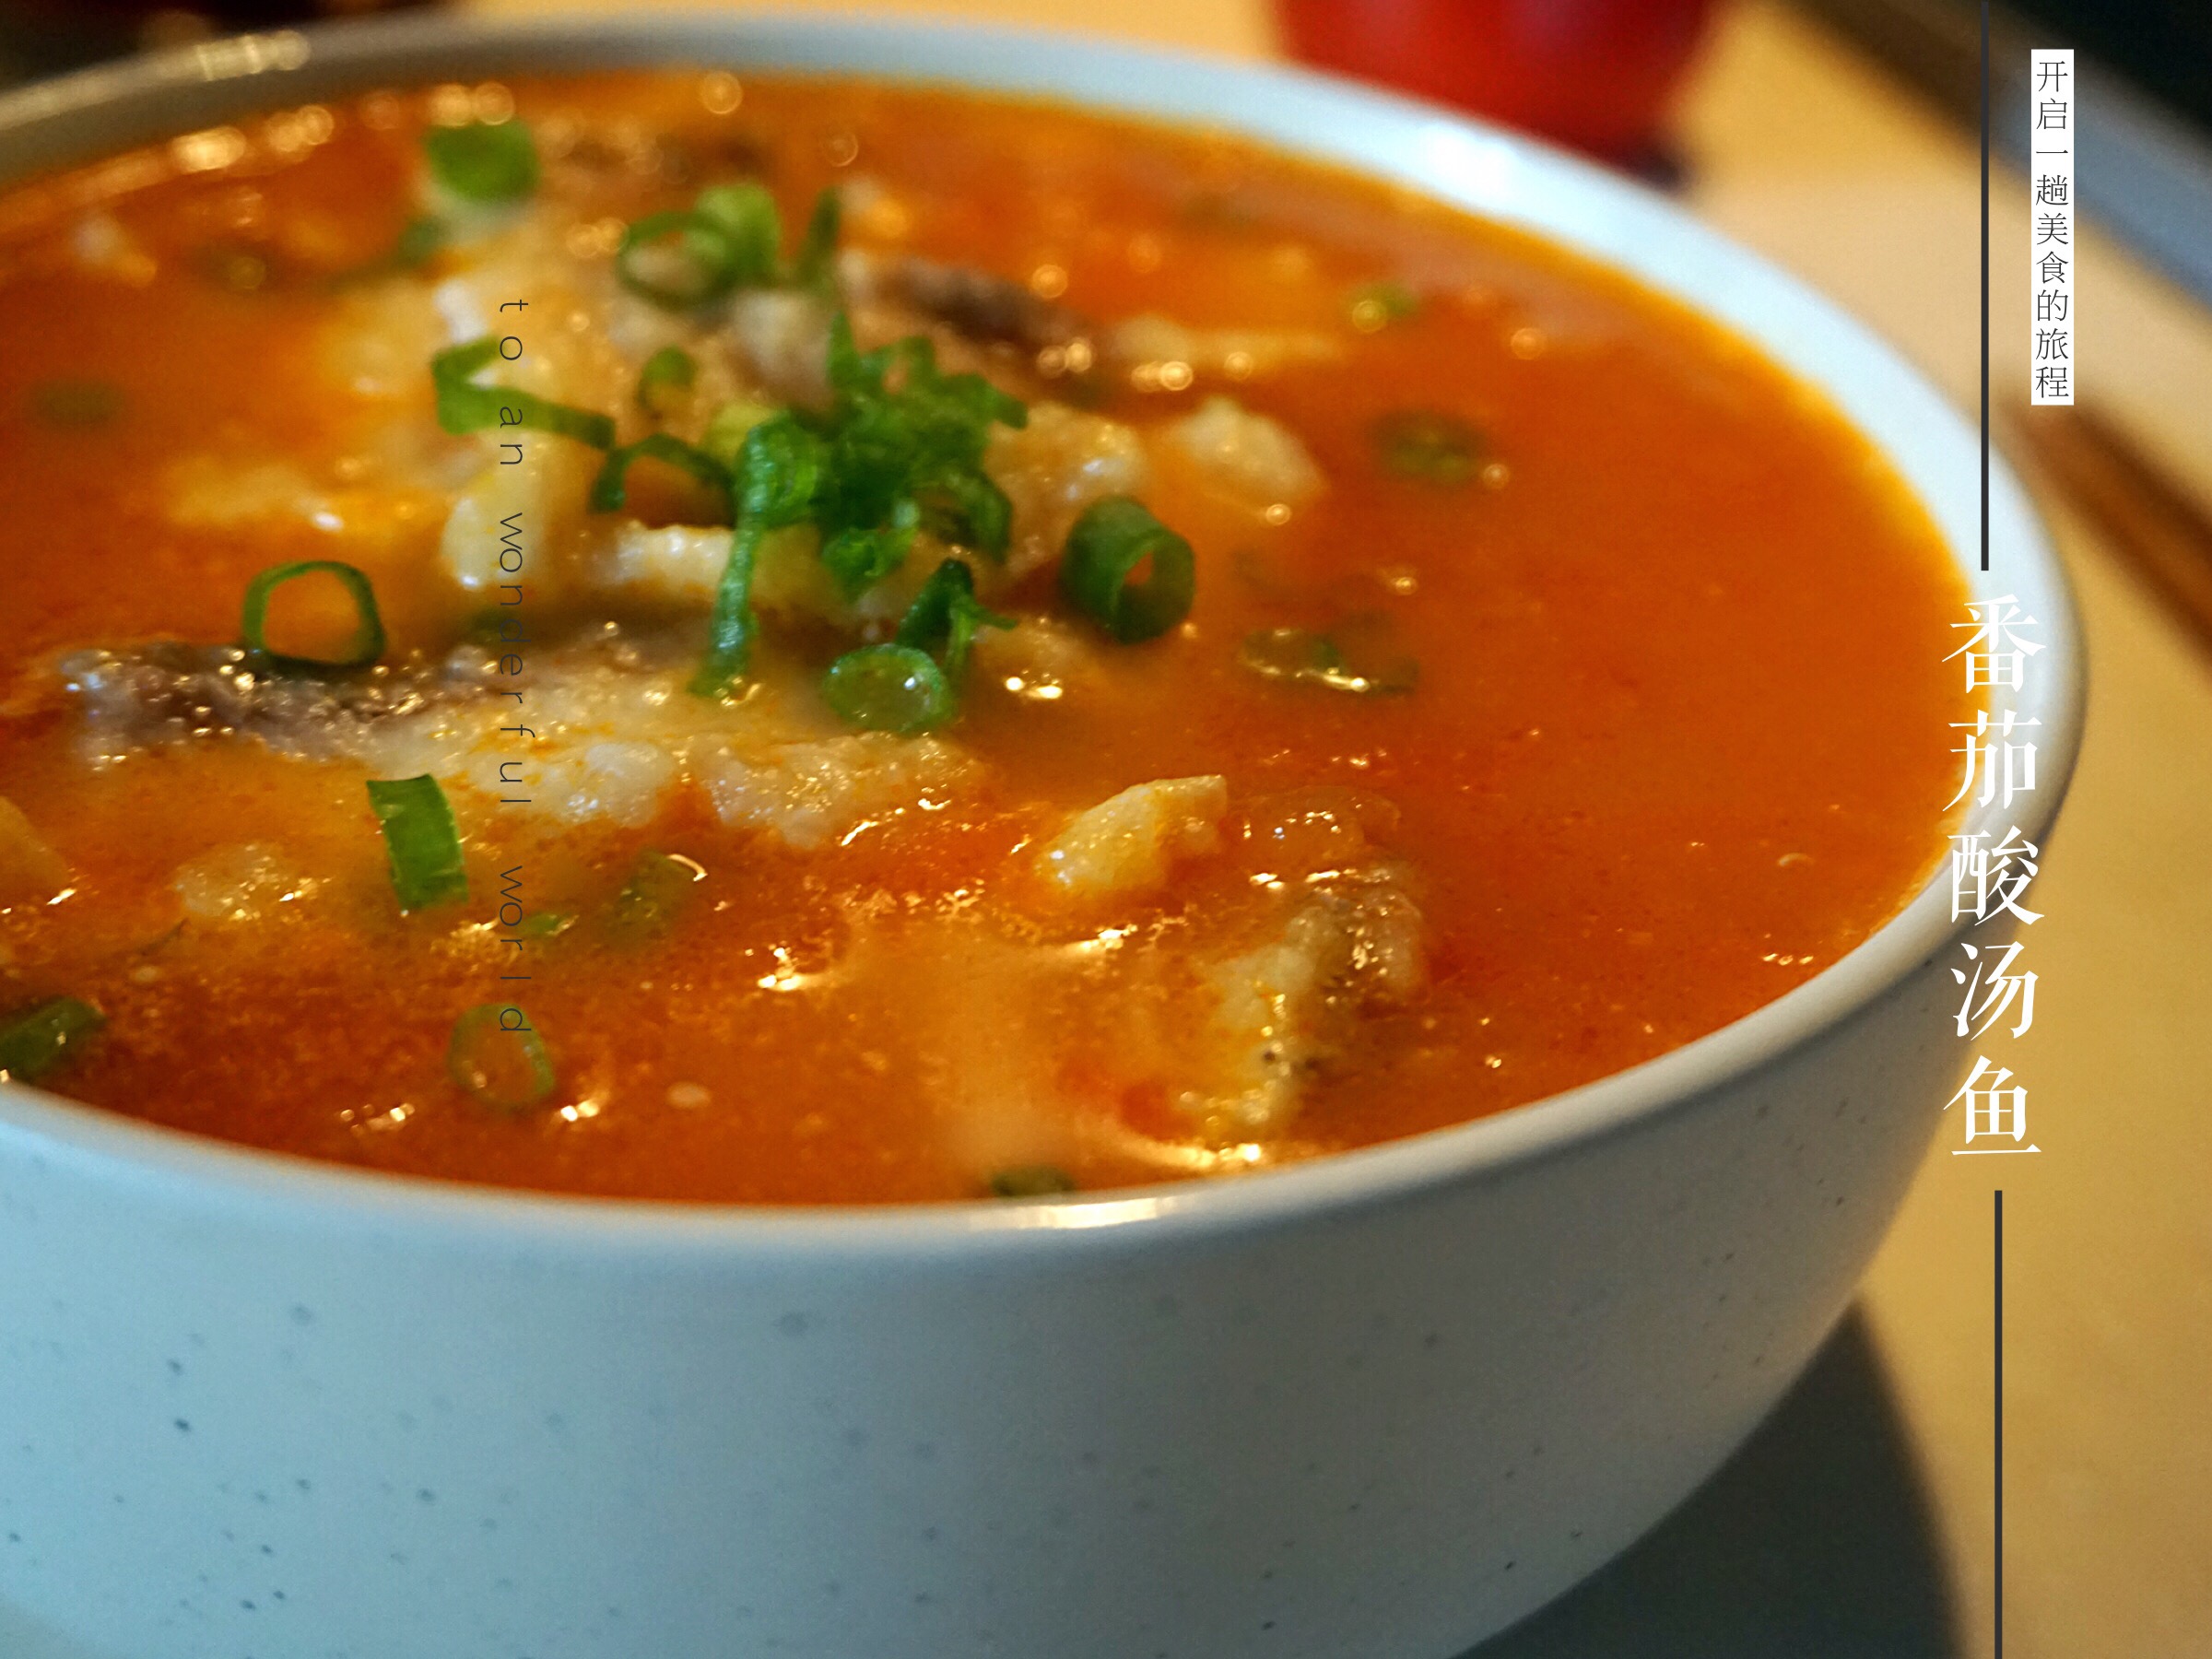 
The practice of fish of tomato acerbity soup, how is fish of tomato acerbity soup done delicious